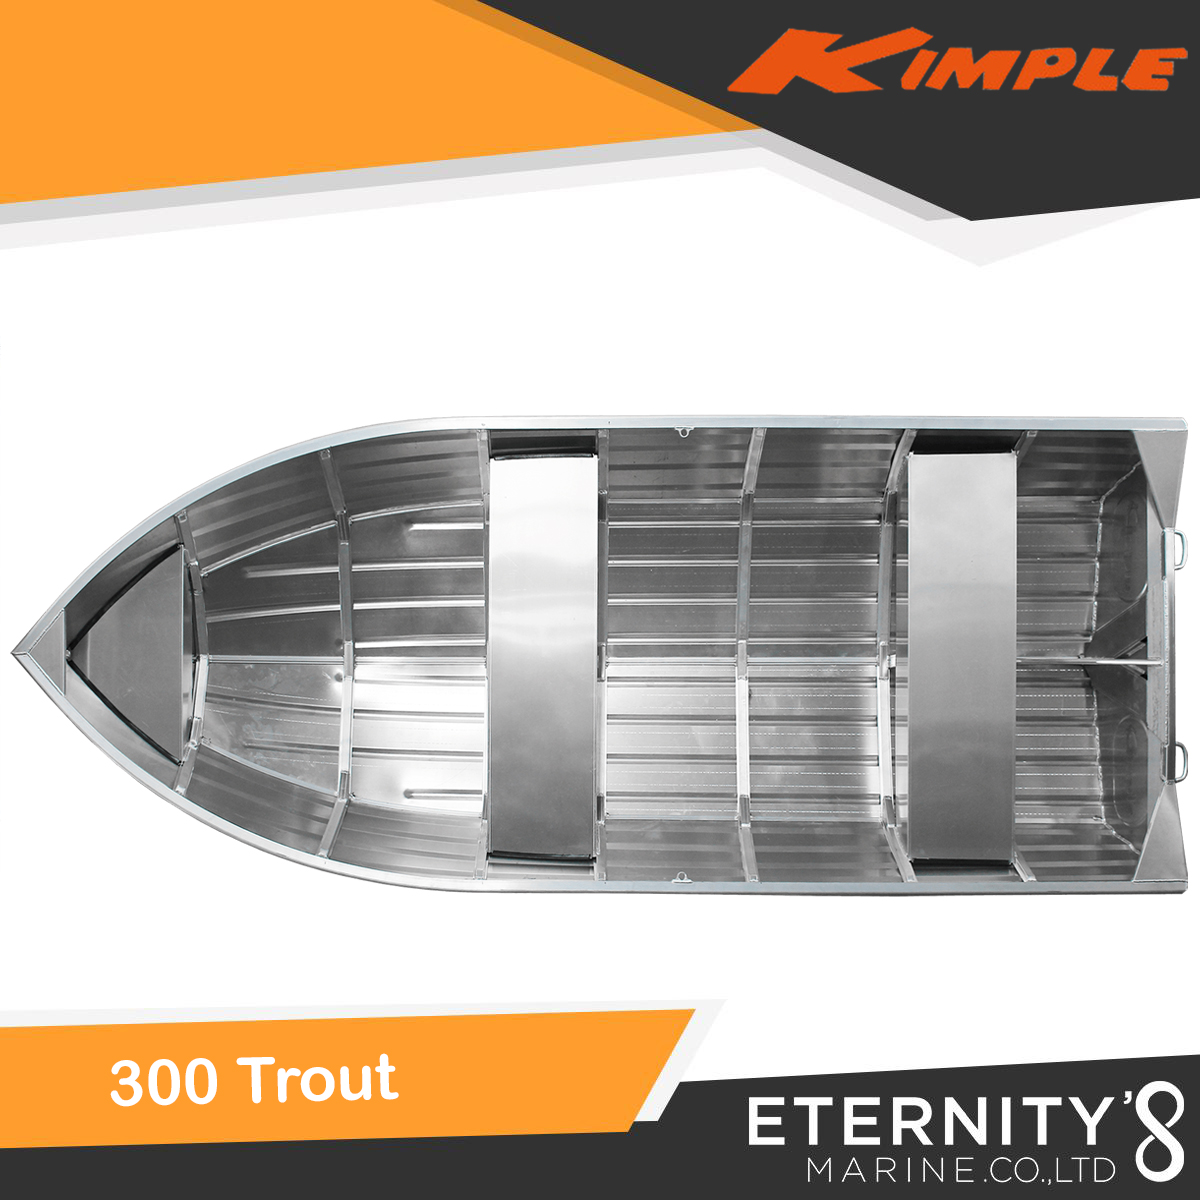 Kimple 300 Trout